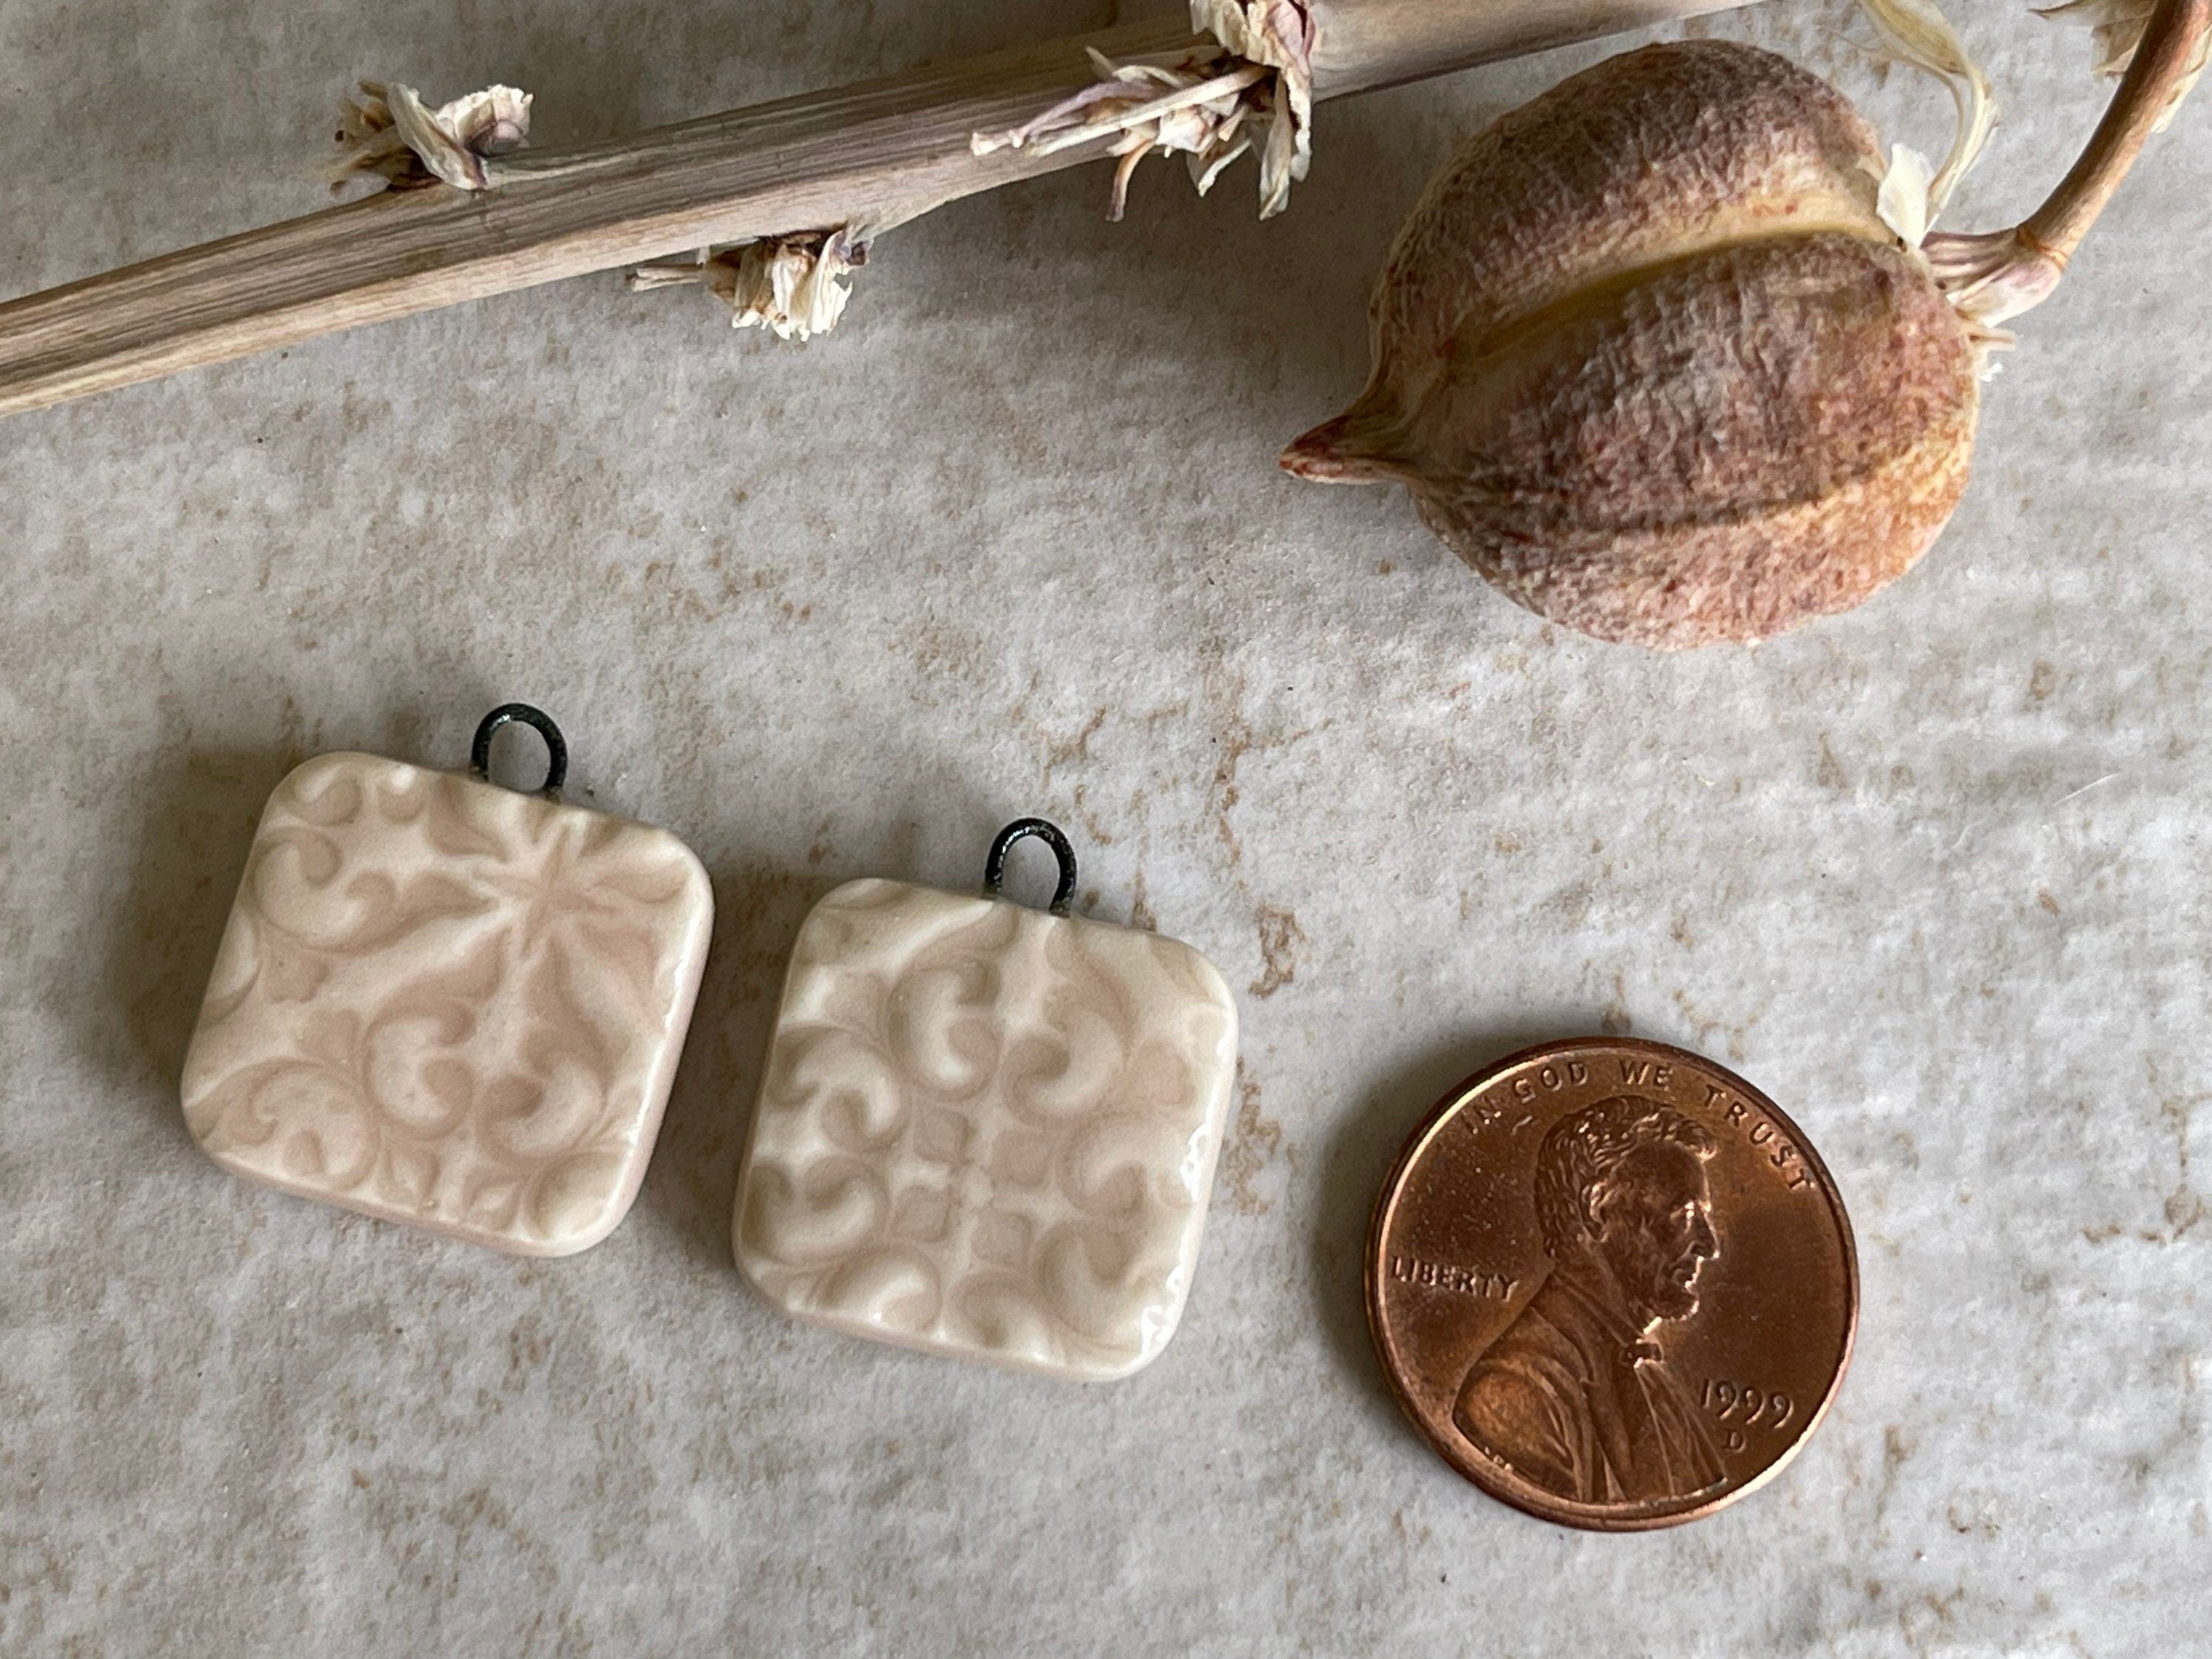 Tuscan Texture, Soft Pink Square, Earring Bead Pair, Porcelain Charms, Ceramic Charms, Jewelry Making Components, Beading Handmade